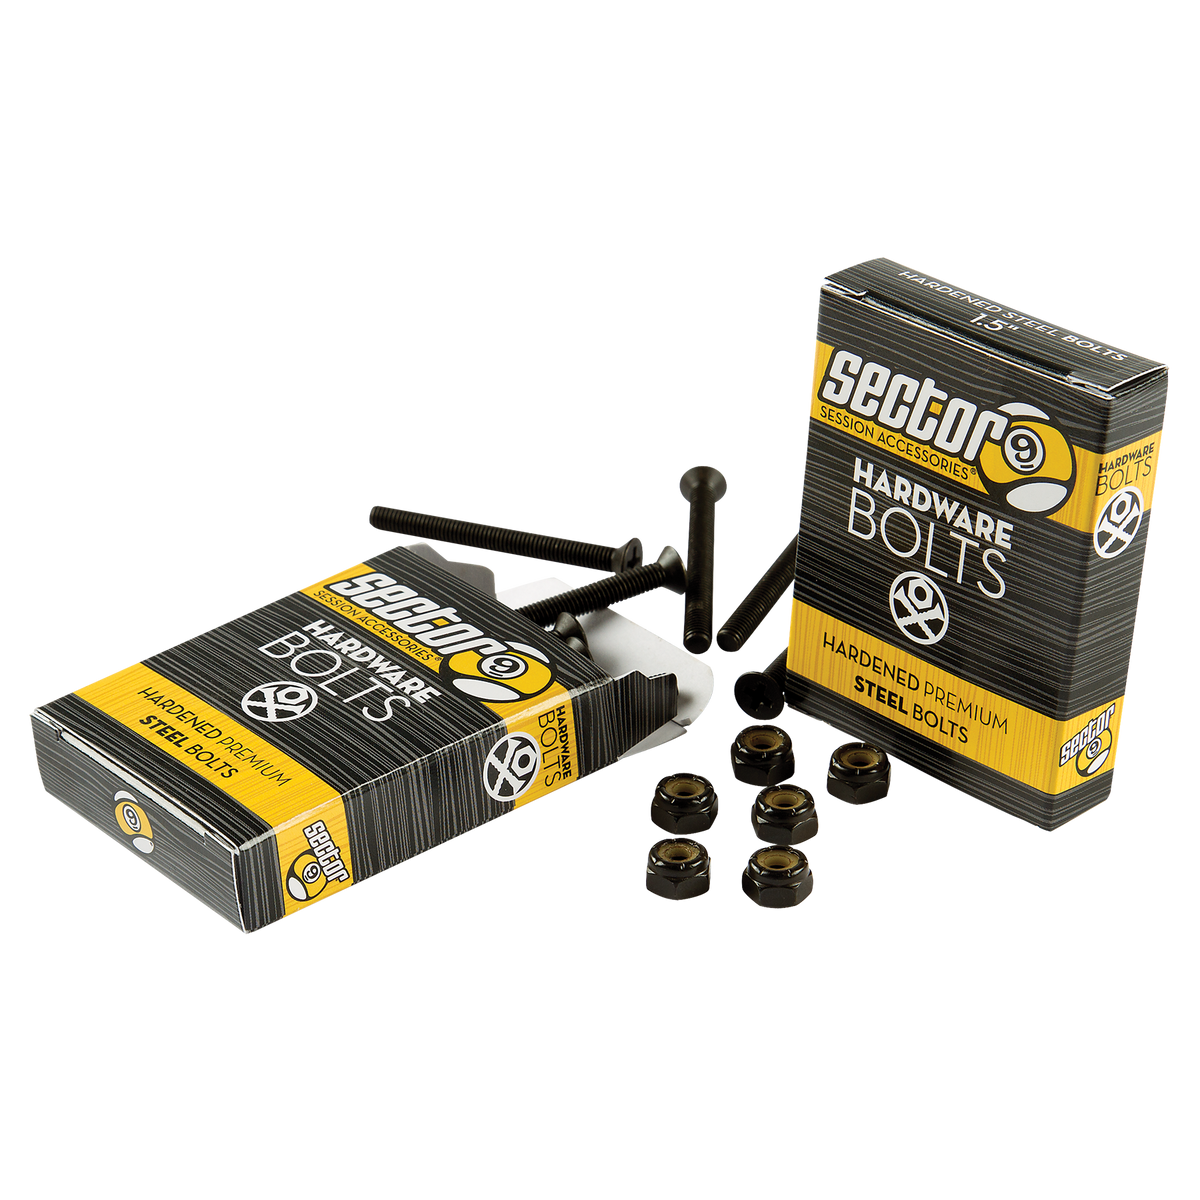 Sector 9 Hardened Steel Bolts 2.0